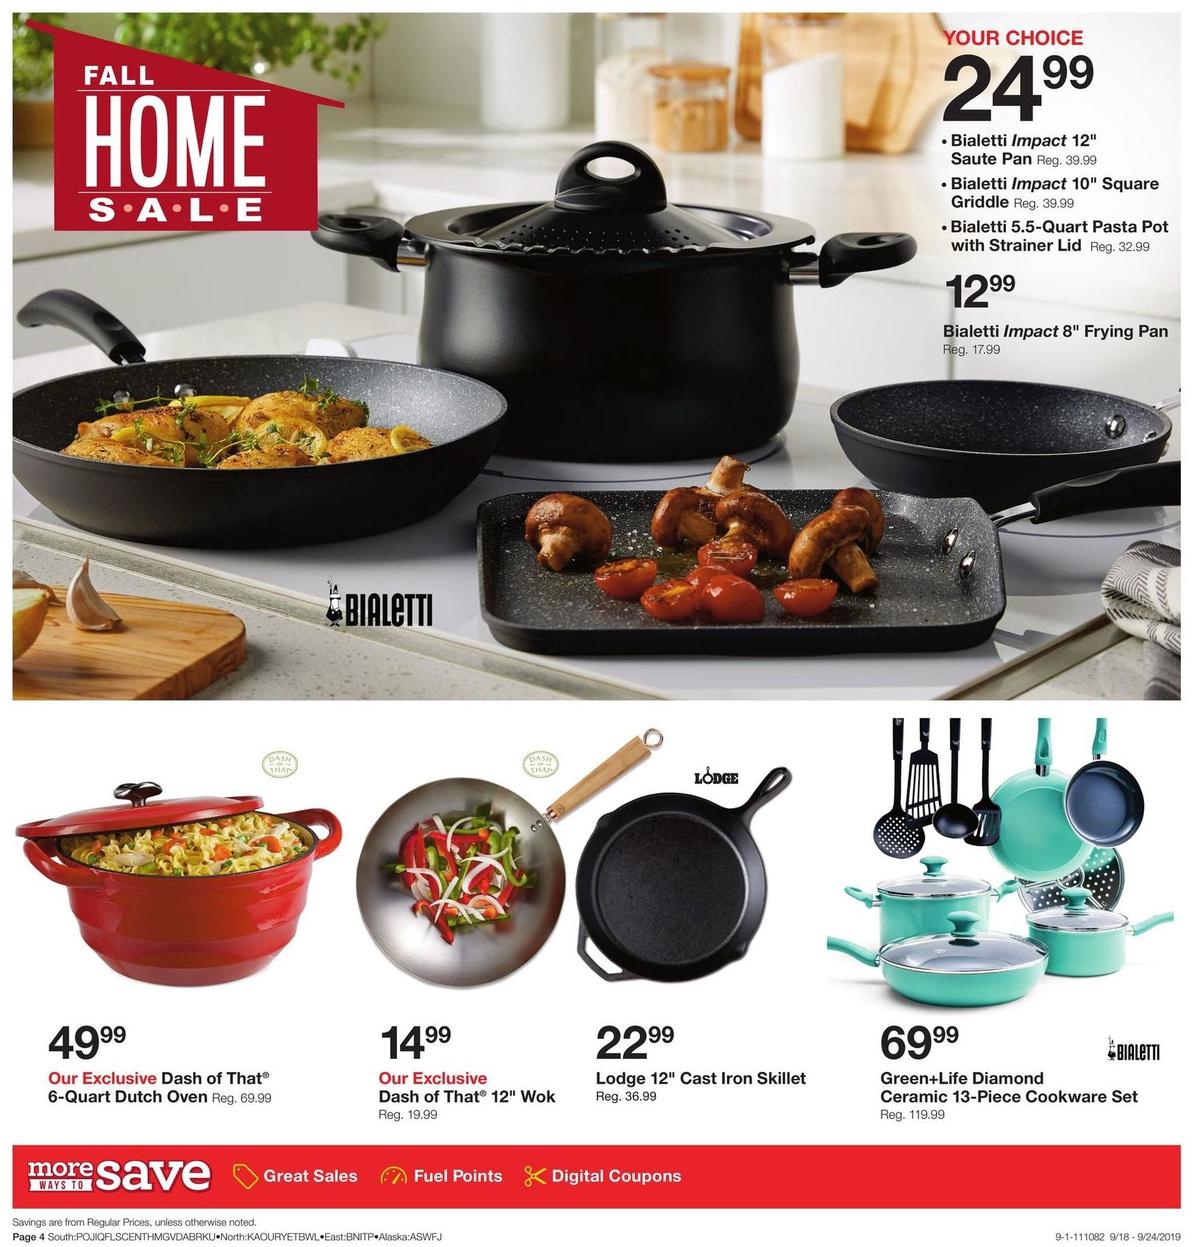 Fred Meyer General Merchandise Weekly Ad from September 18